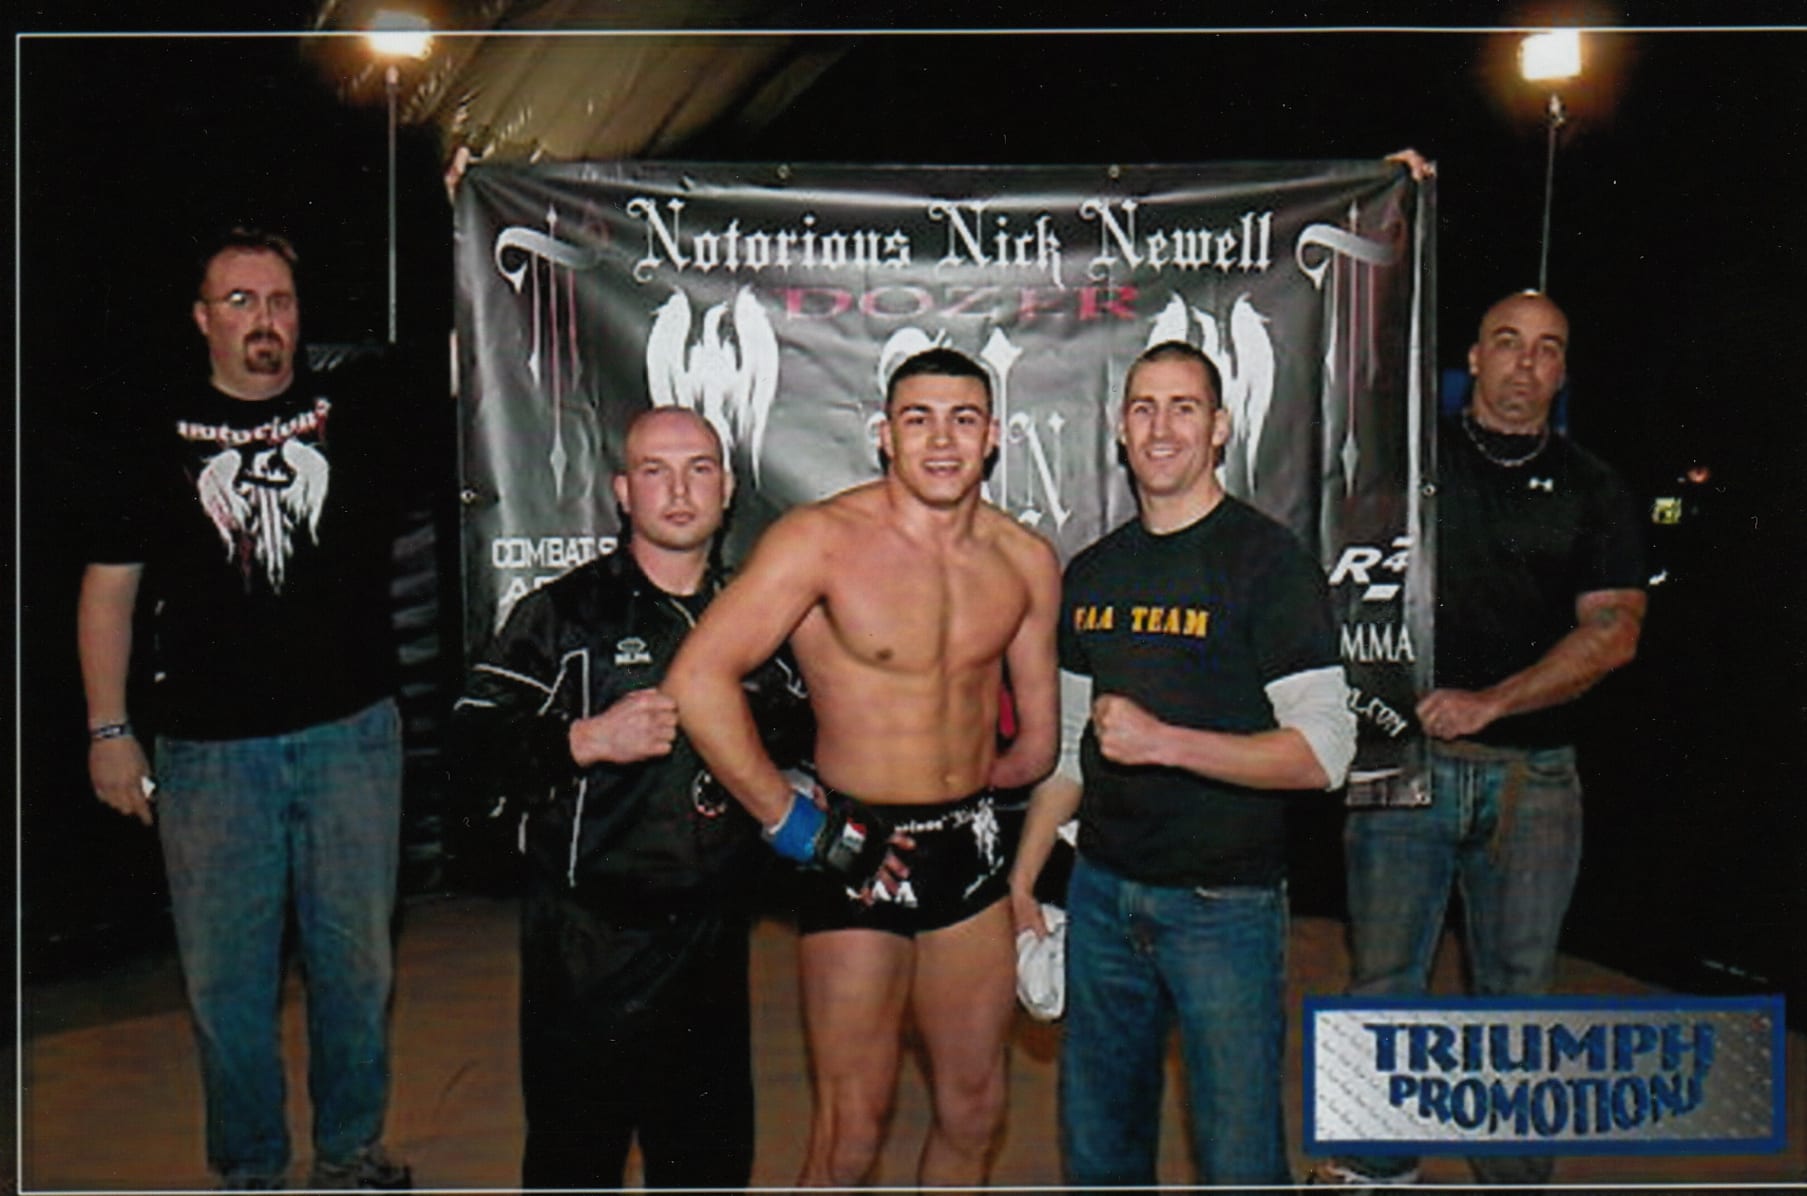 Notorious Nick Newell